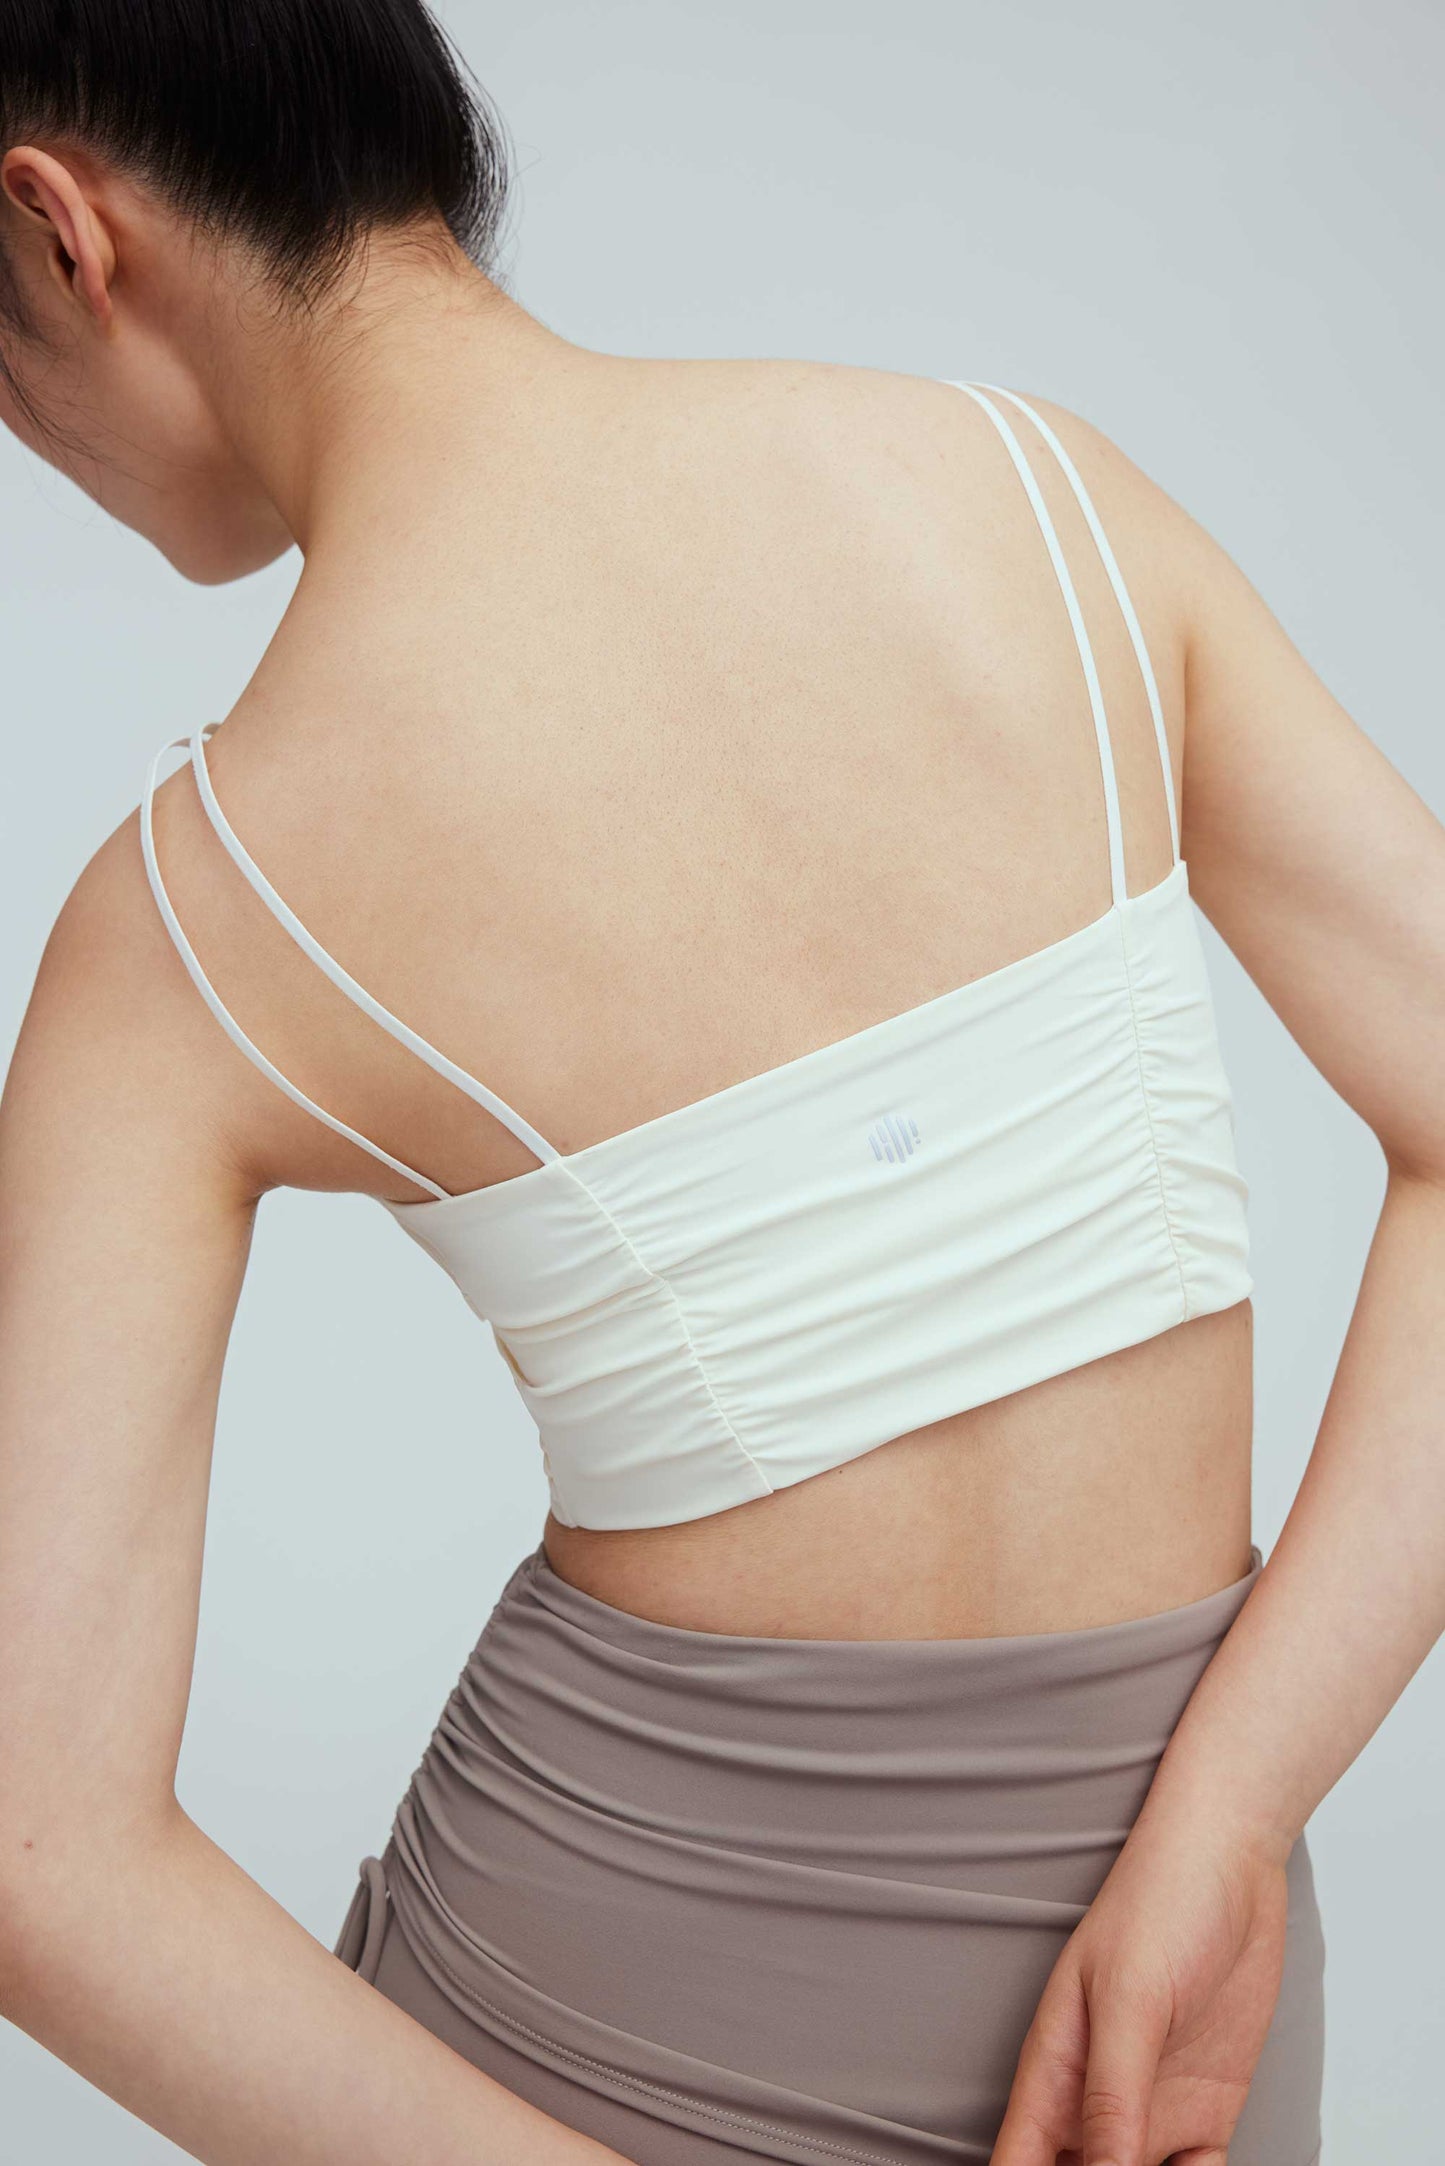 the back of a woman wearing a white sports bra with pleats details and a pair of grey leggings with double layered waist.